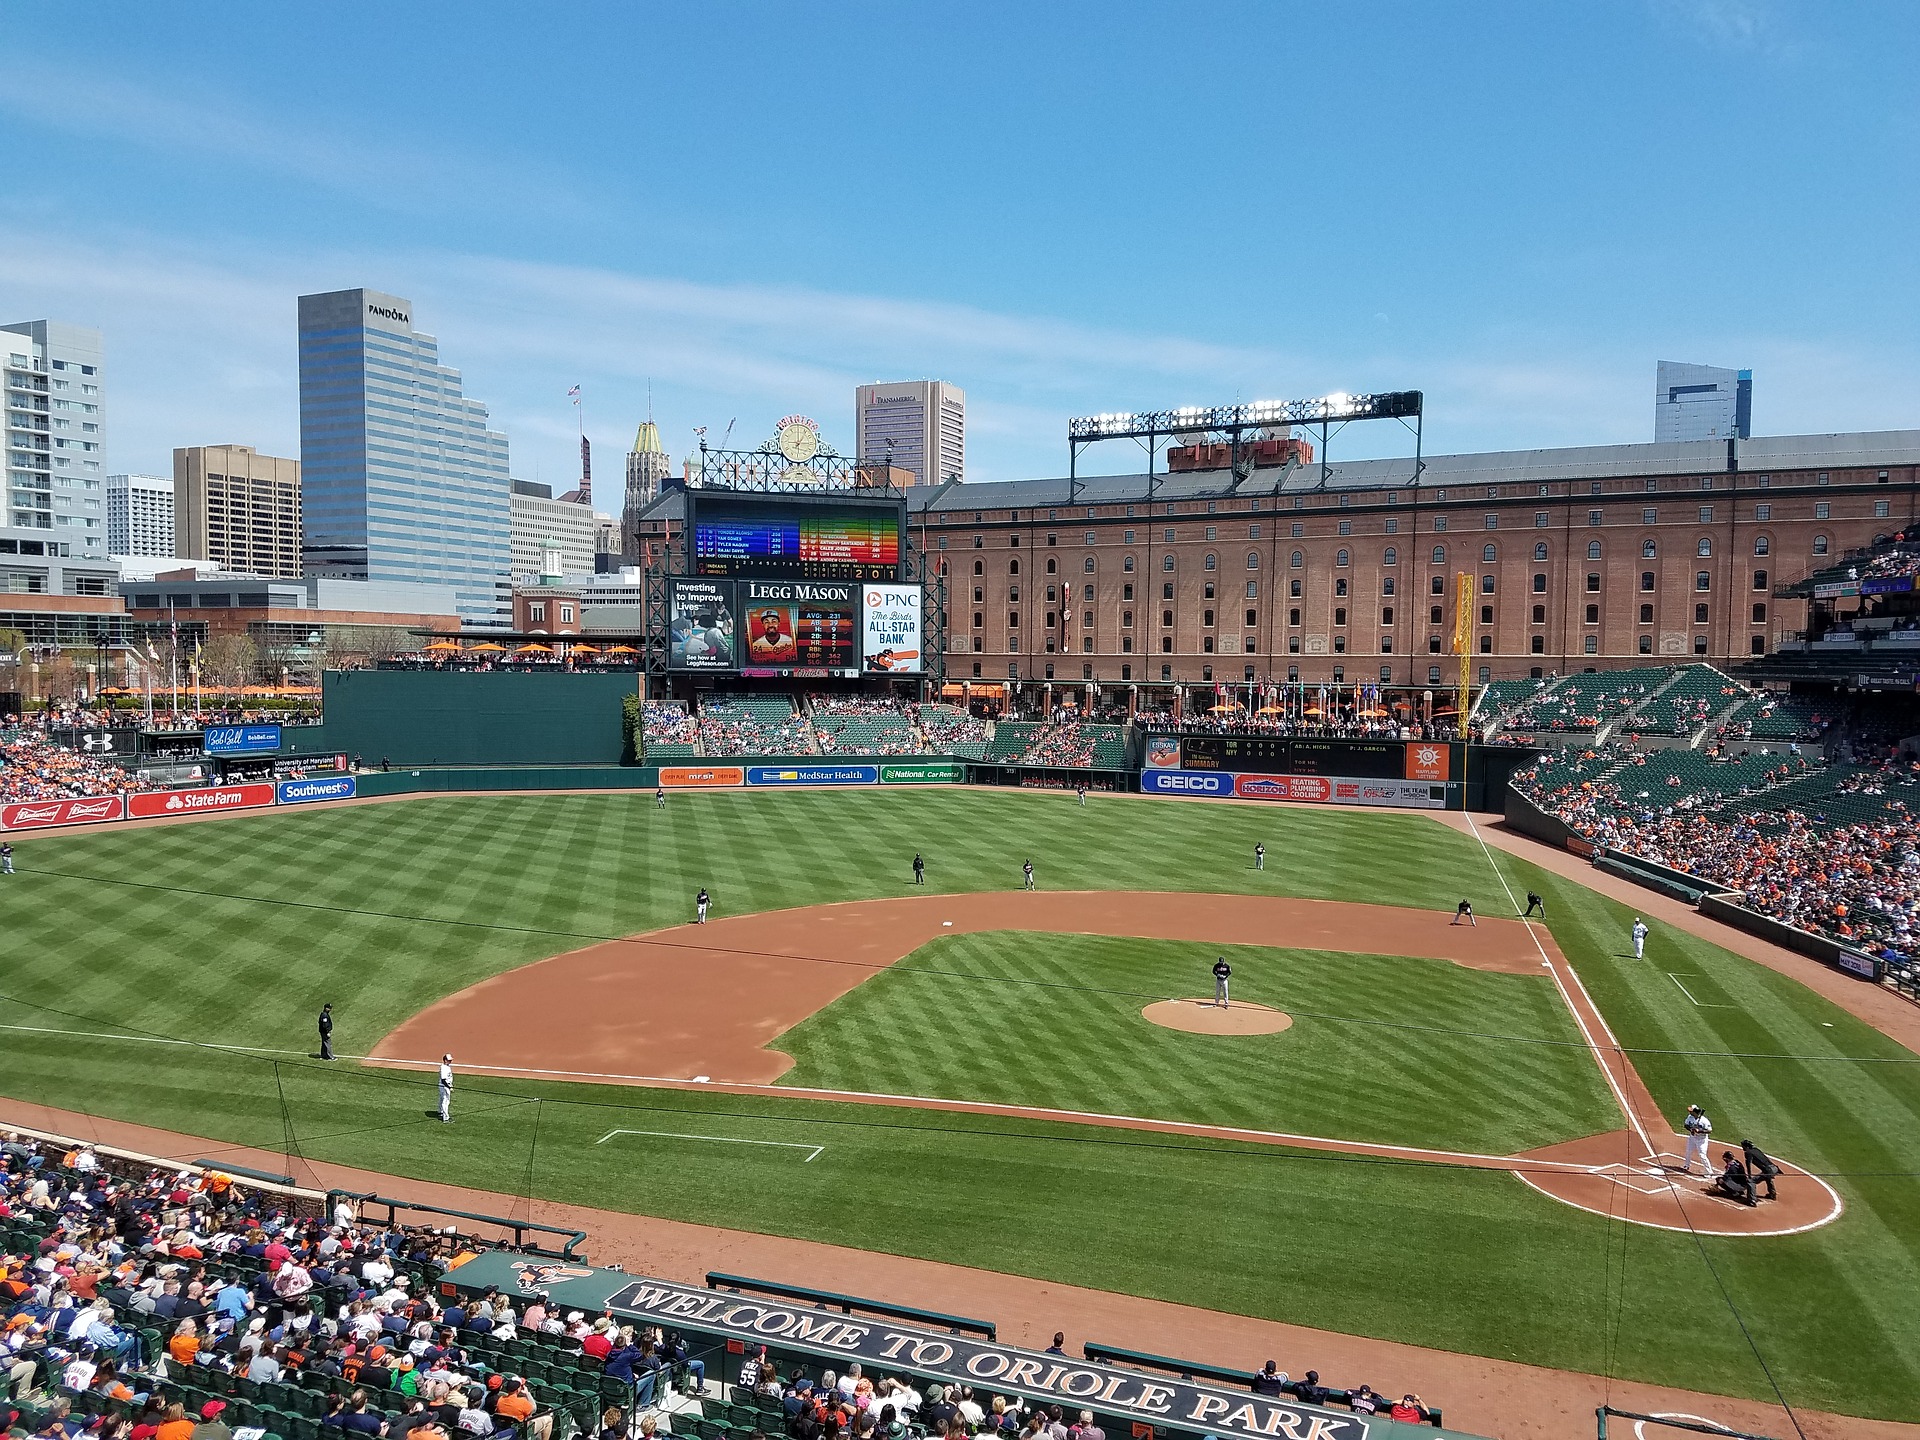 Orioles Become 1st American Pro Sports Team with Braille on